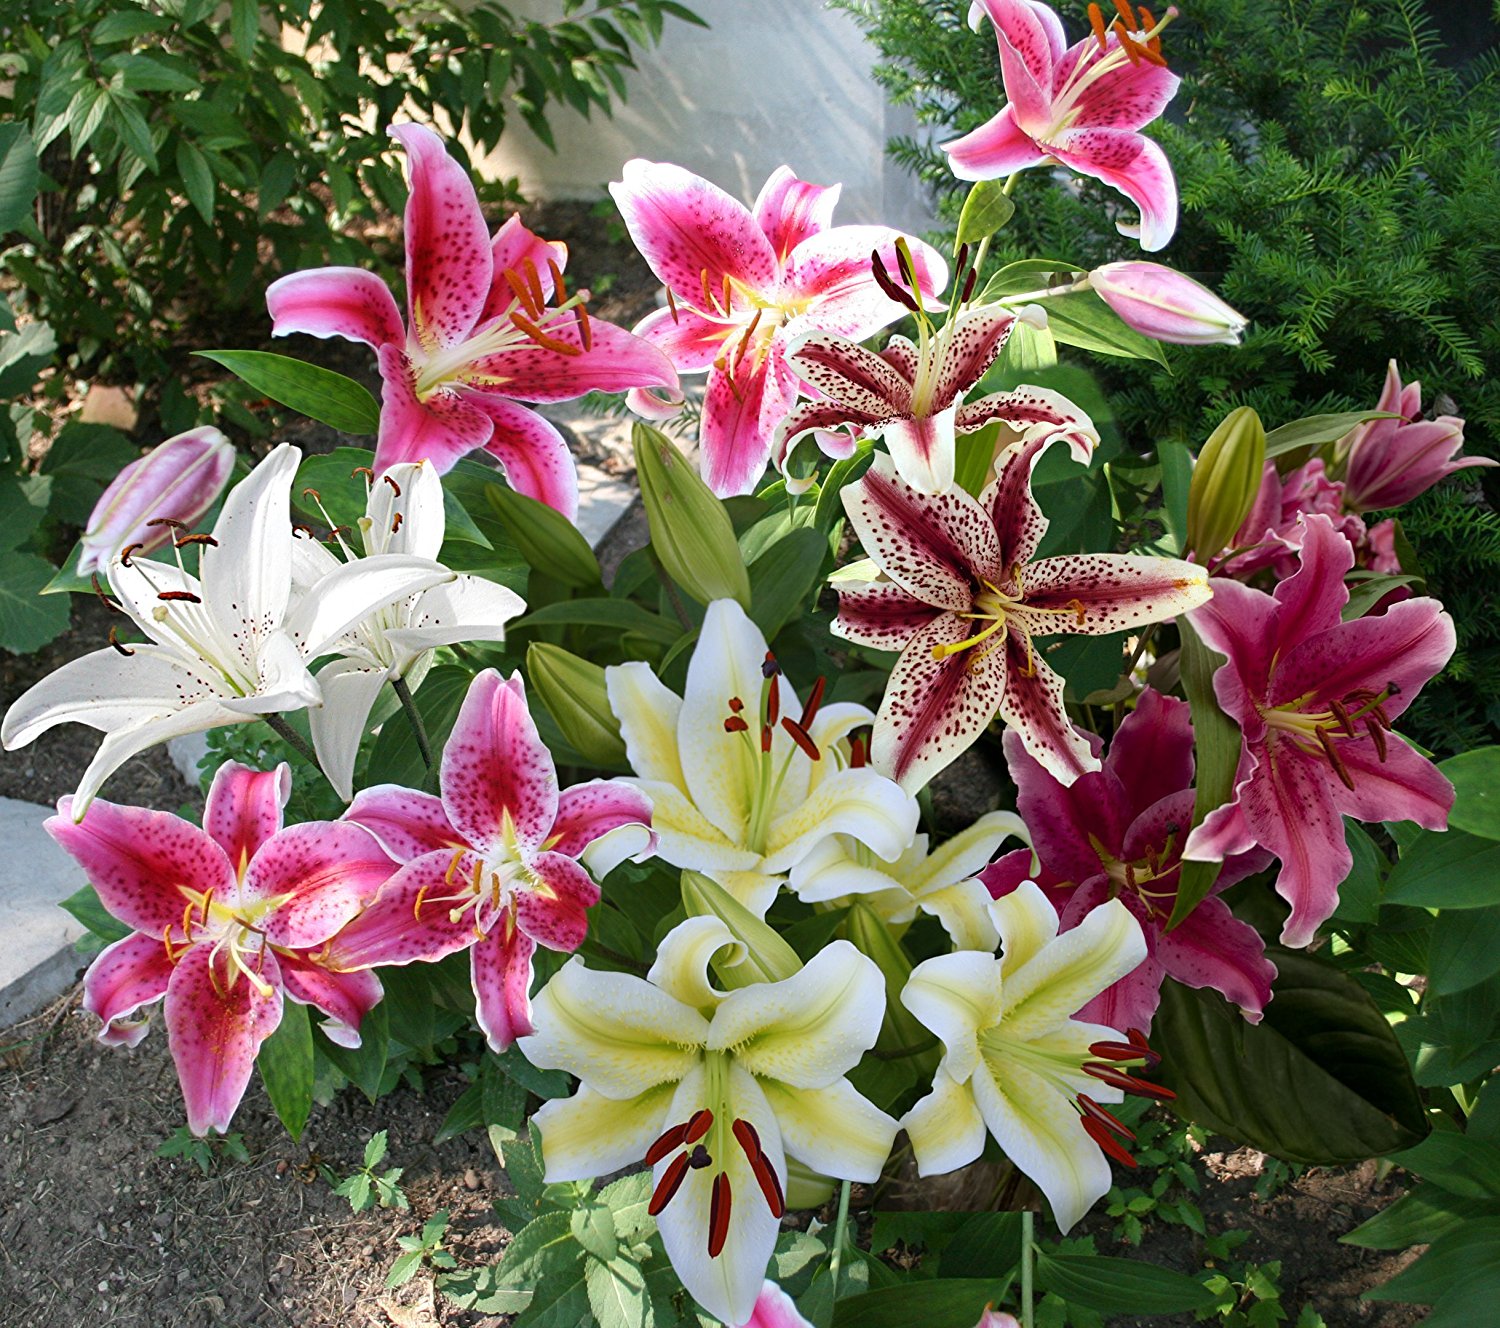 Amazon.com : Mixed Oriental Lily Bulbs (Pack of 8) - Fragrant Blooms ...